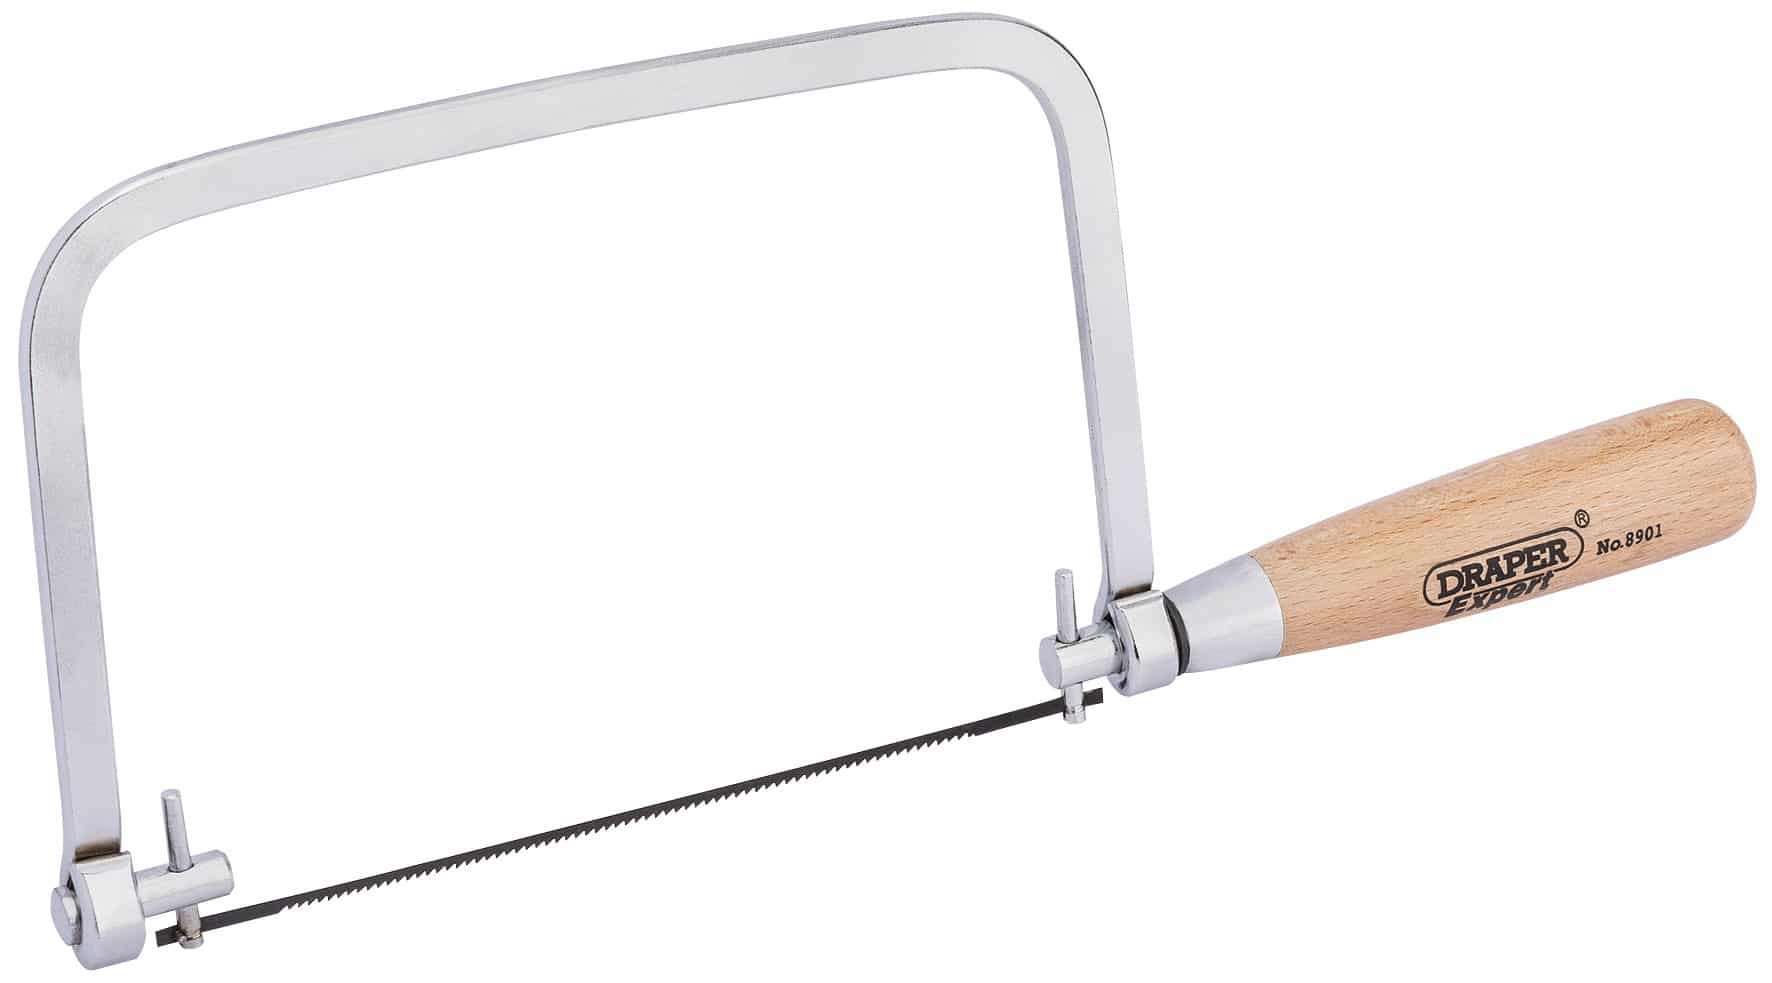 How To Use Coping Saw Blades